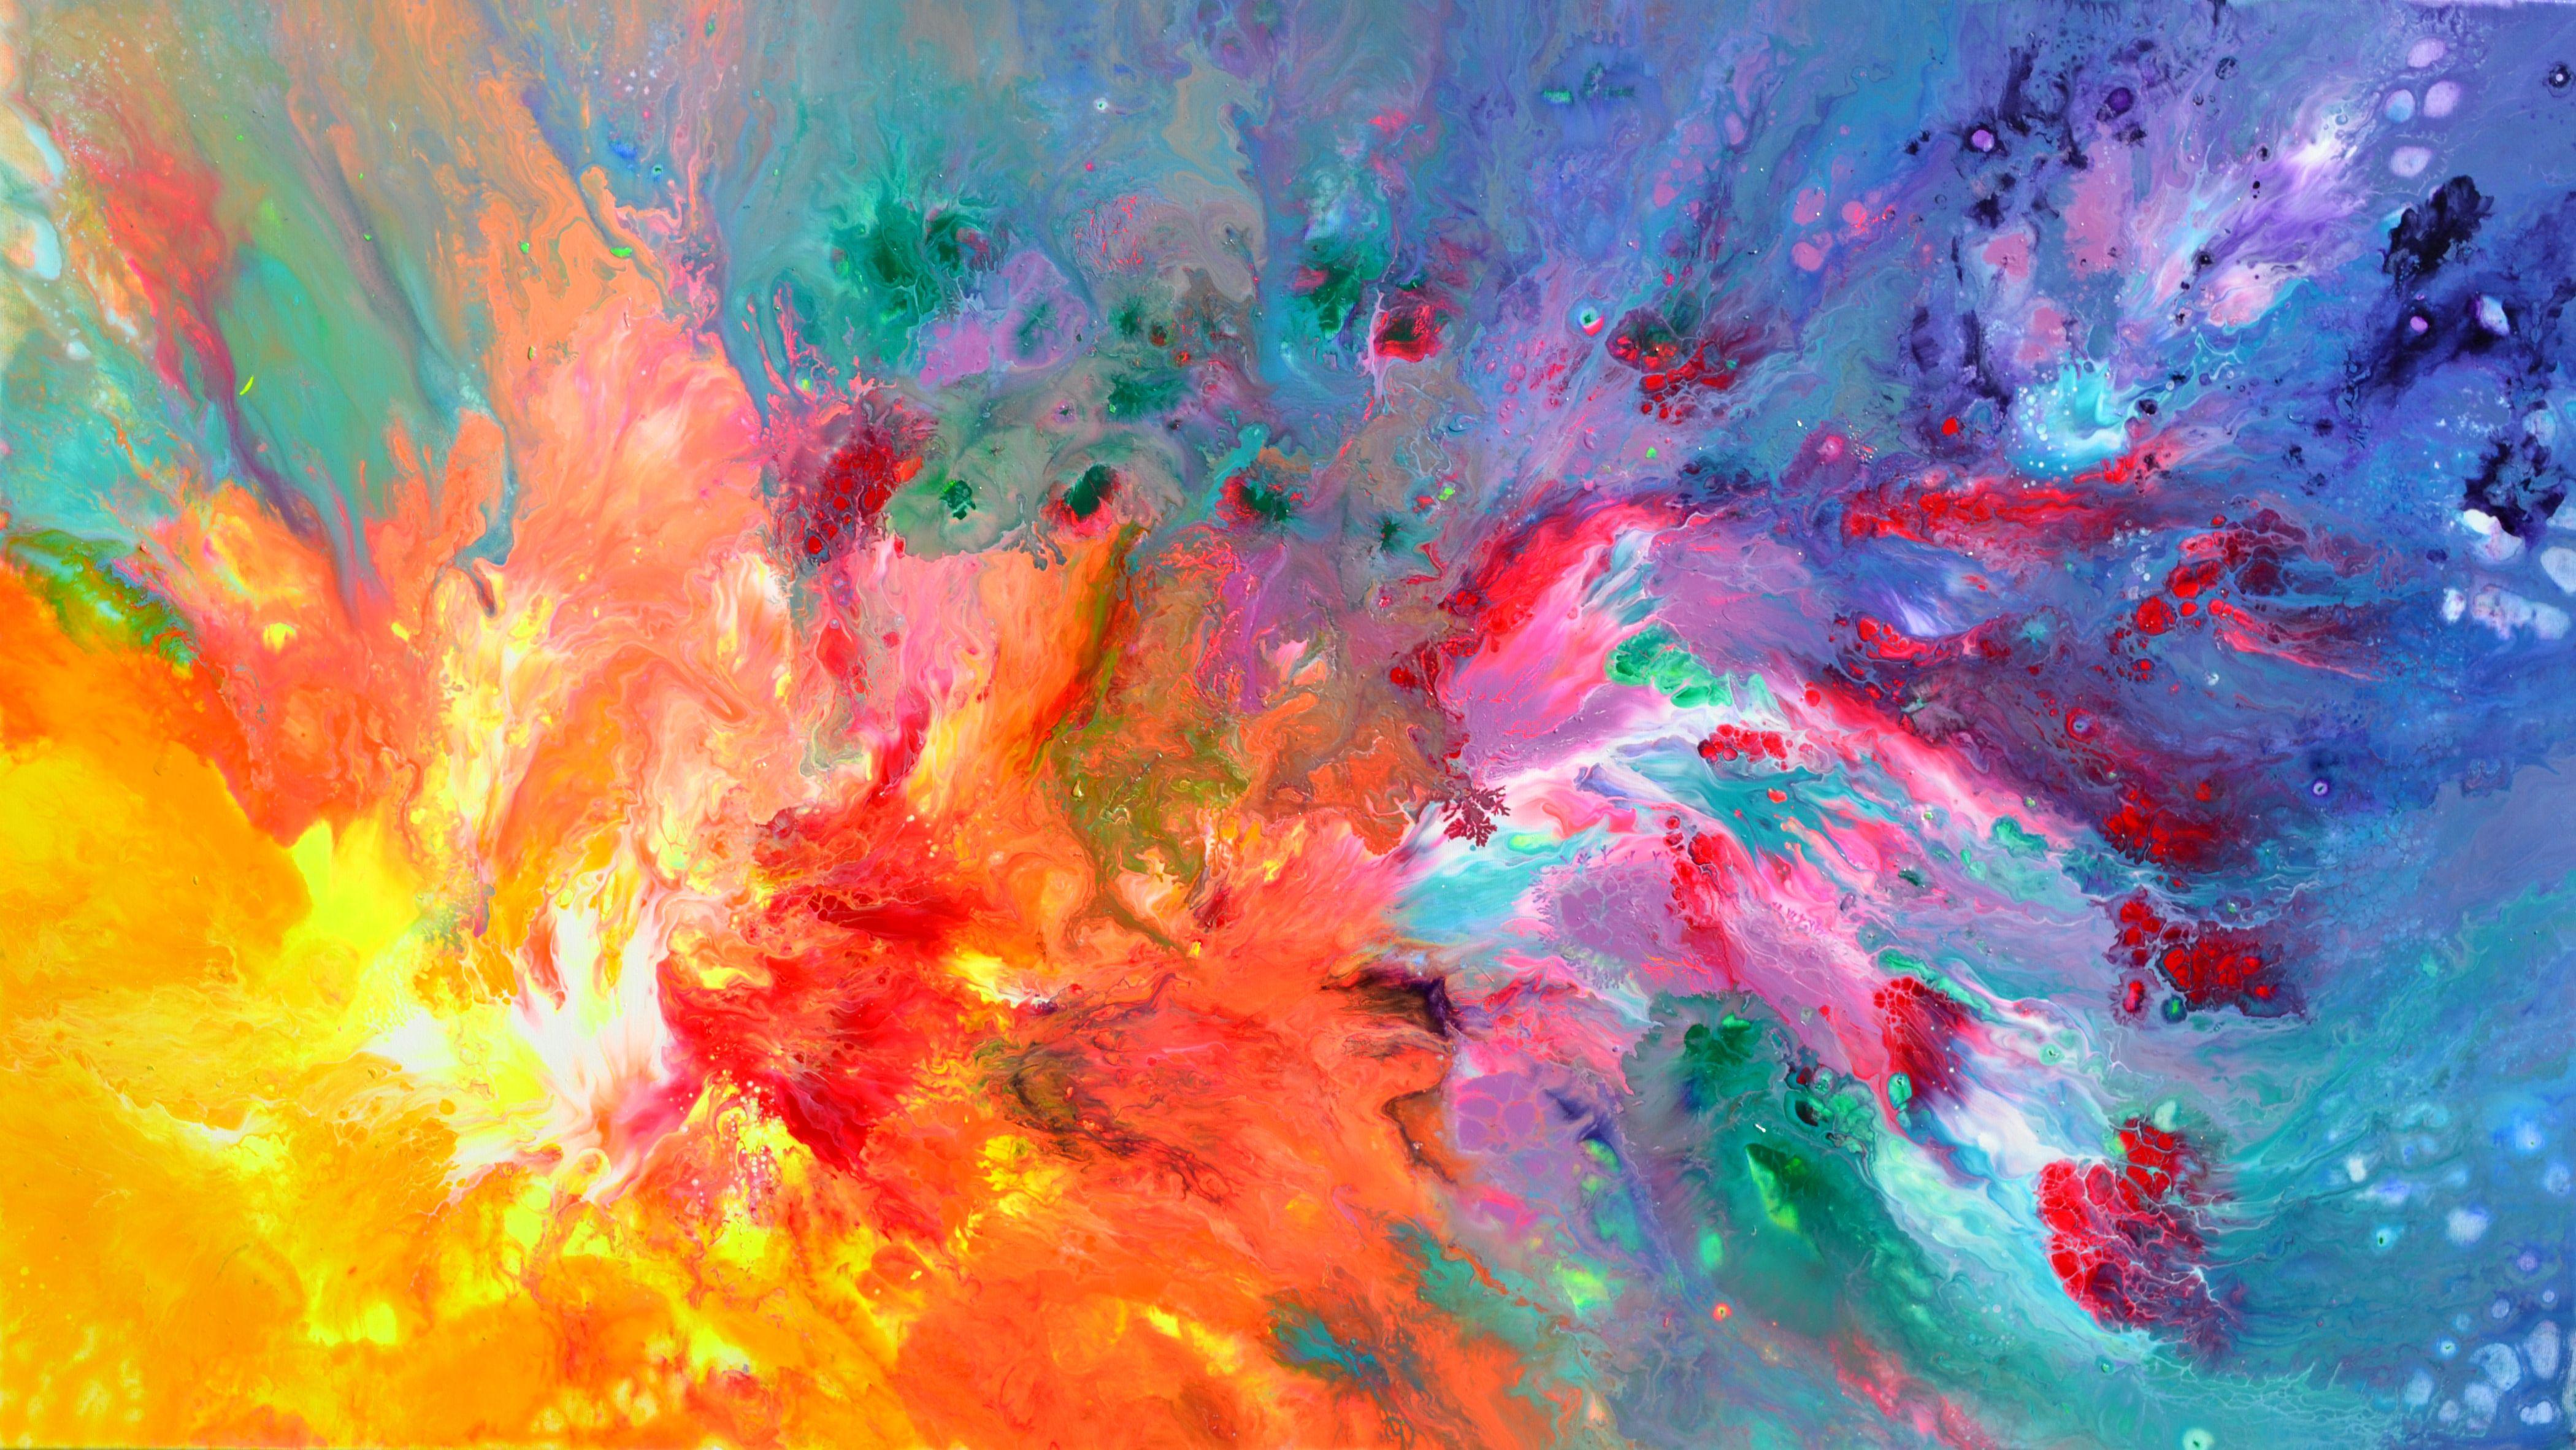 SOOS TIBERIU Abstract Painting - Water meets Fire, Painting, Acrylic on Canvas